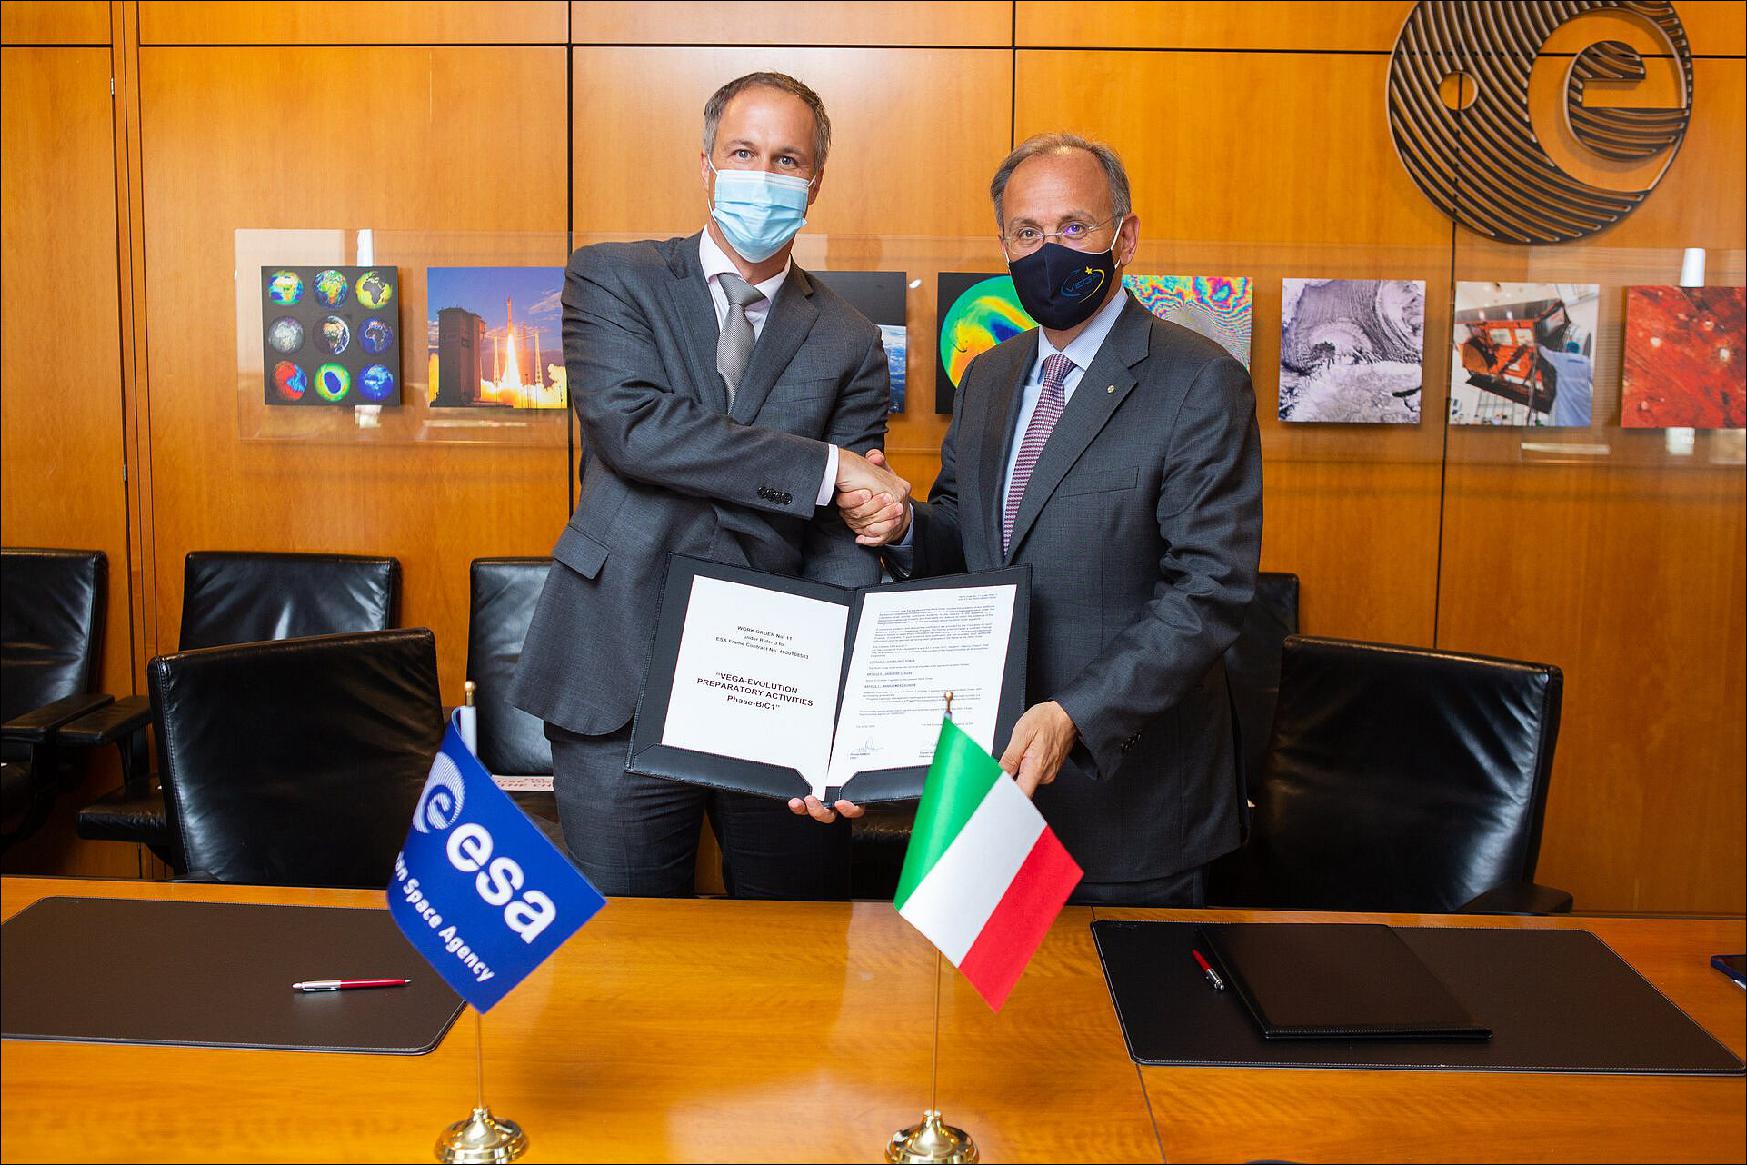 Figure 35: A contract worth €118.8 m for the preparation of Vega-E was signed at ESA’s establishment in Frascati, Italy, by Daniel Neuenschwander, ESA Director of Space Transportation and Giulio Ranzo, CEO at Avio. This will further increase the competitiveness and environmental sustainability of Europe’s Vega launch system beyond 2025. - Prime contractor, Avio, with partners will further define the launcher system and its subsystems as well as the preliminary design of the Vega-E launch pad and the associated infrastructure at Europe’s Spaceport in French Guiana (image credit: ESA, Maria Novella De Luca)